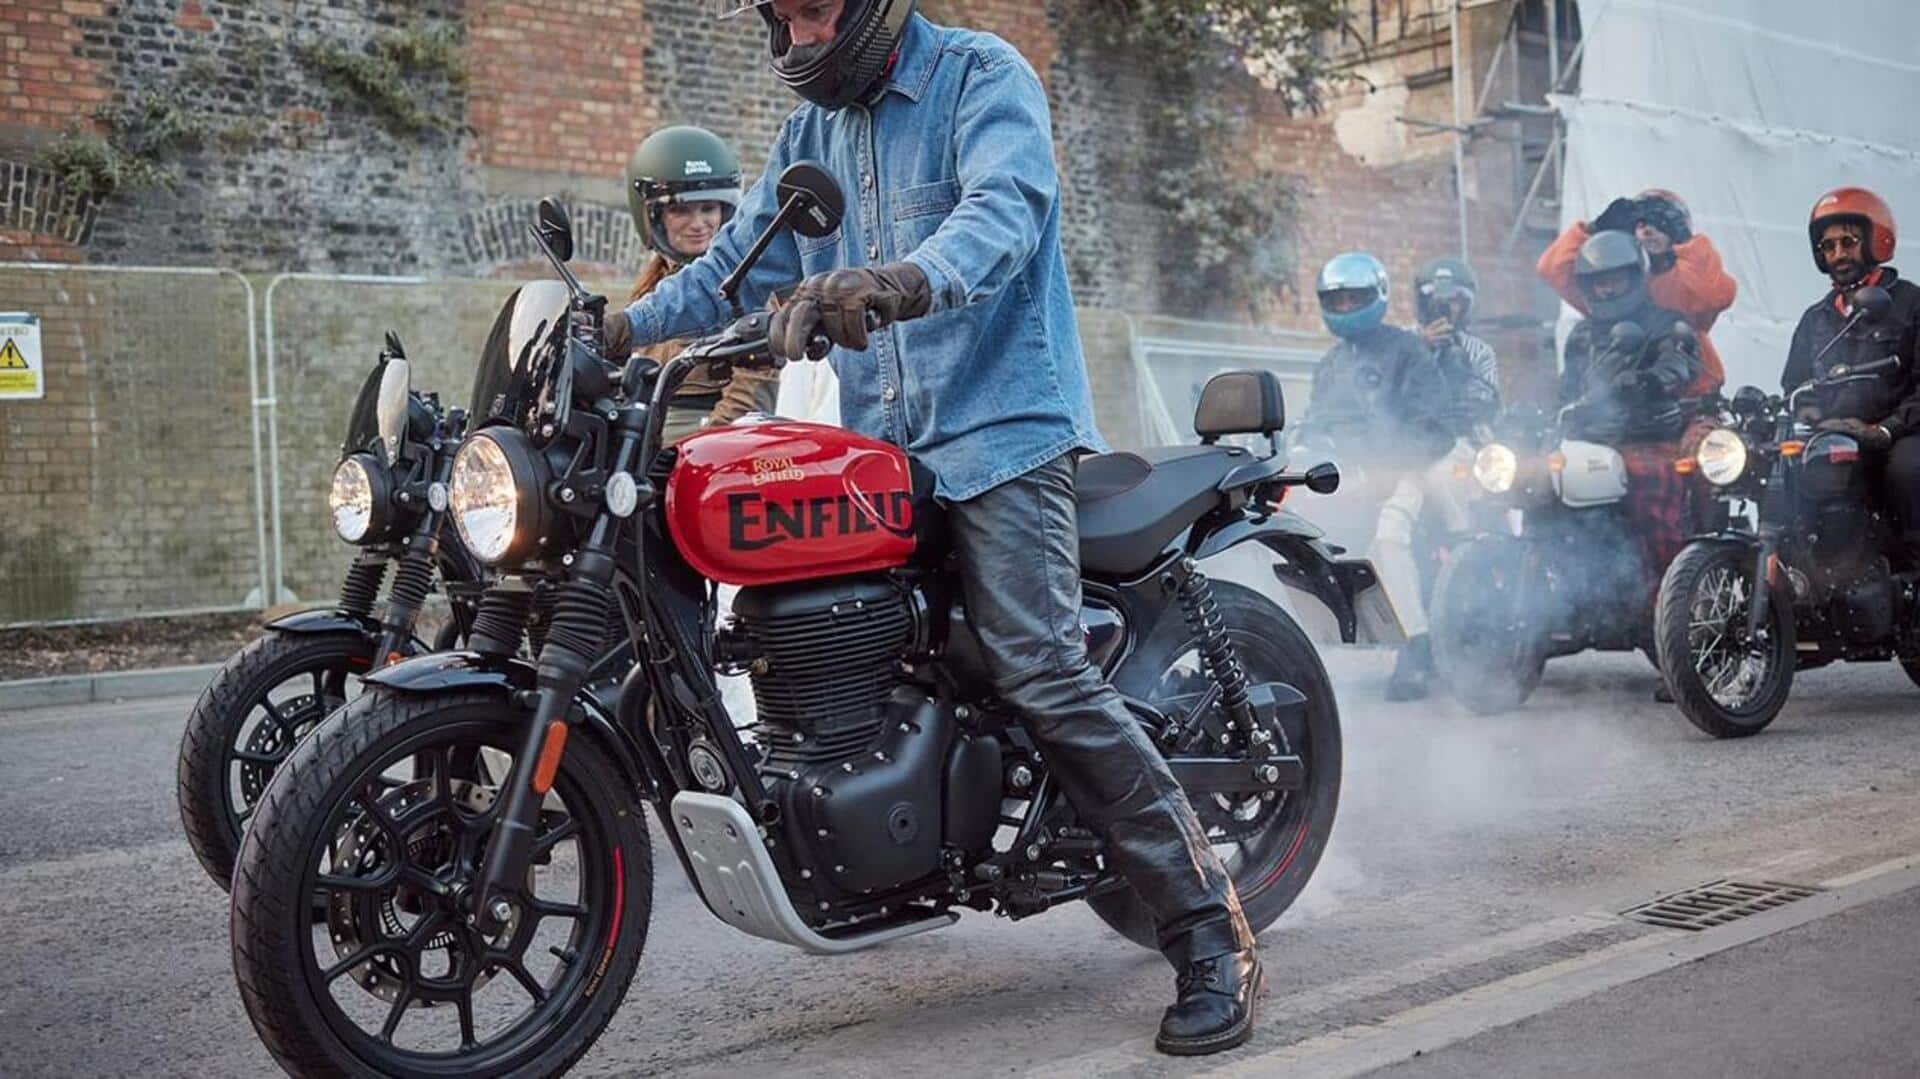 What to expect from Royal Enfield's upcoming 650cc bike